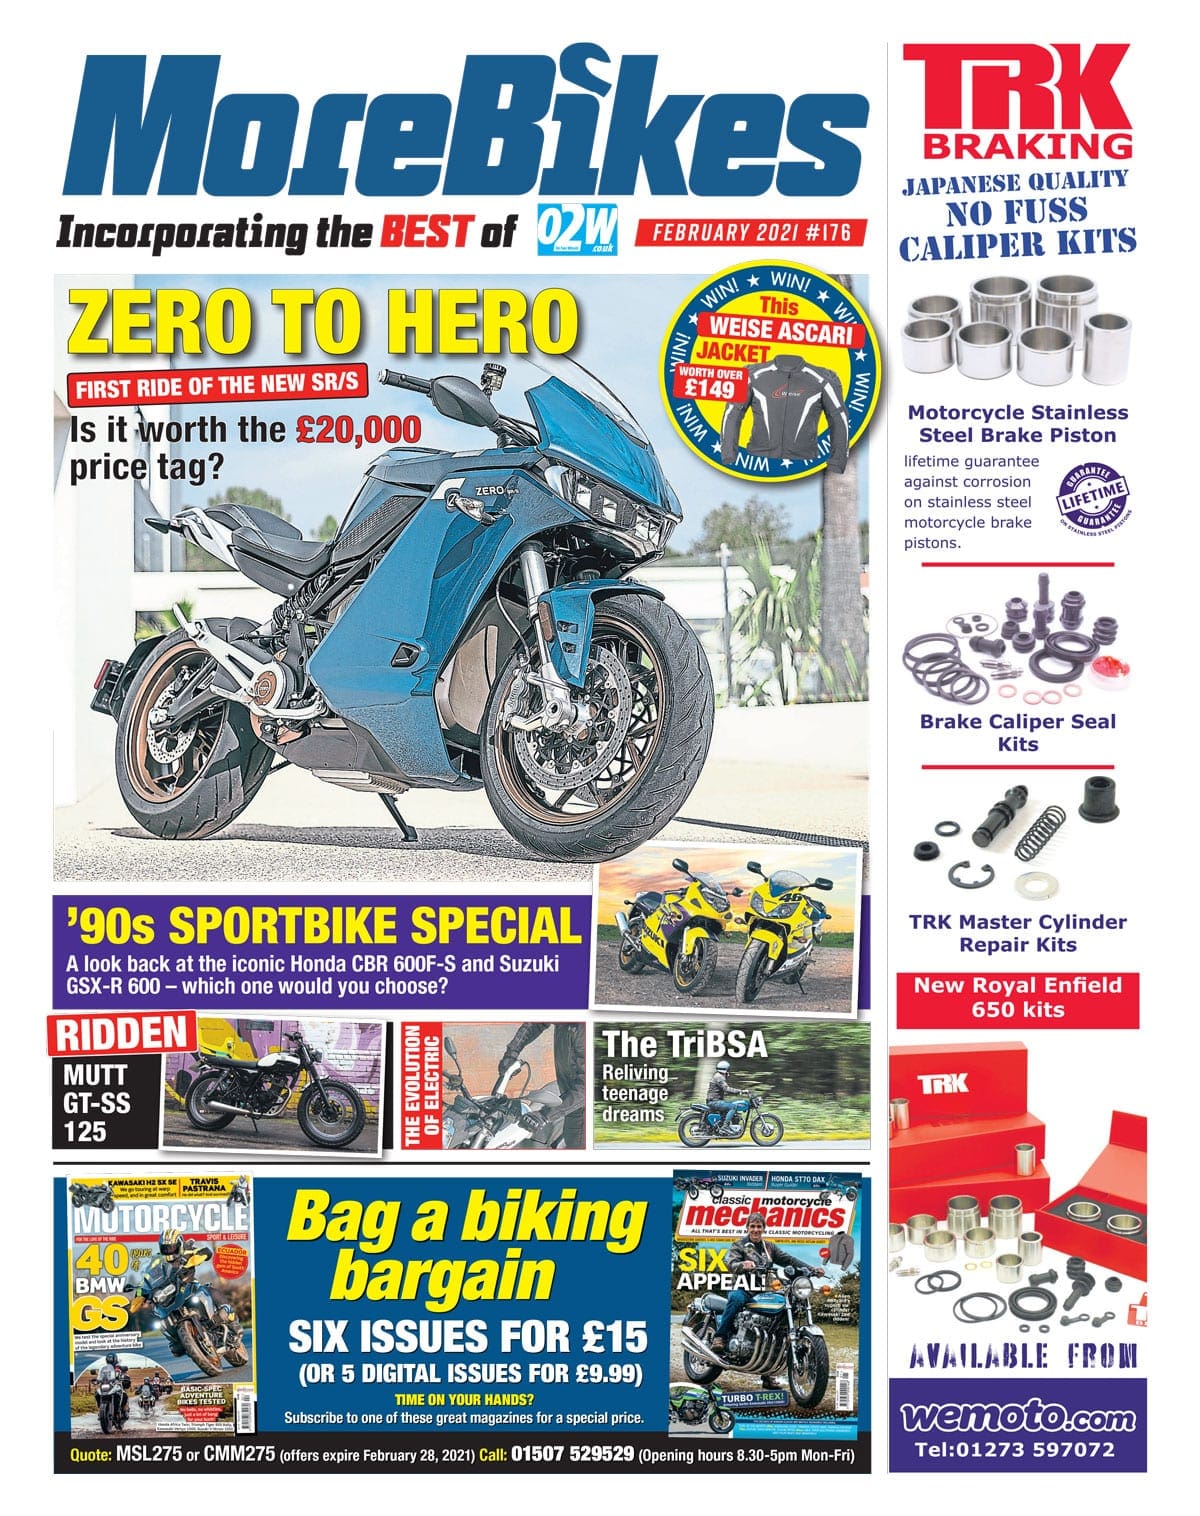 PREVIEW: Inside the February issue of MoreBikes